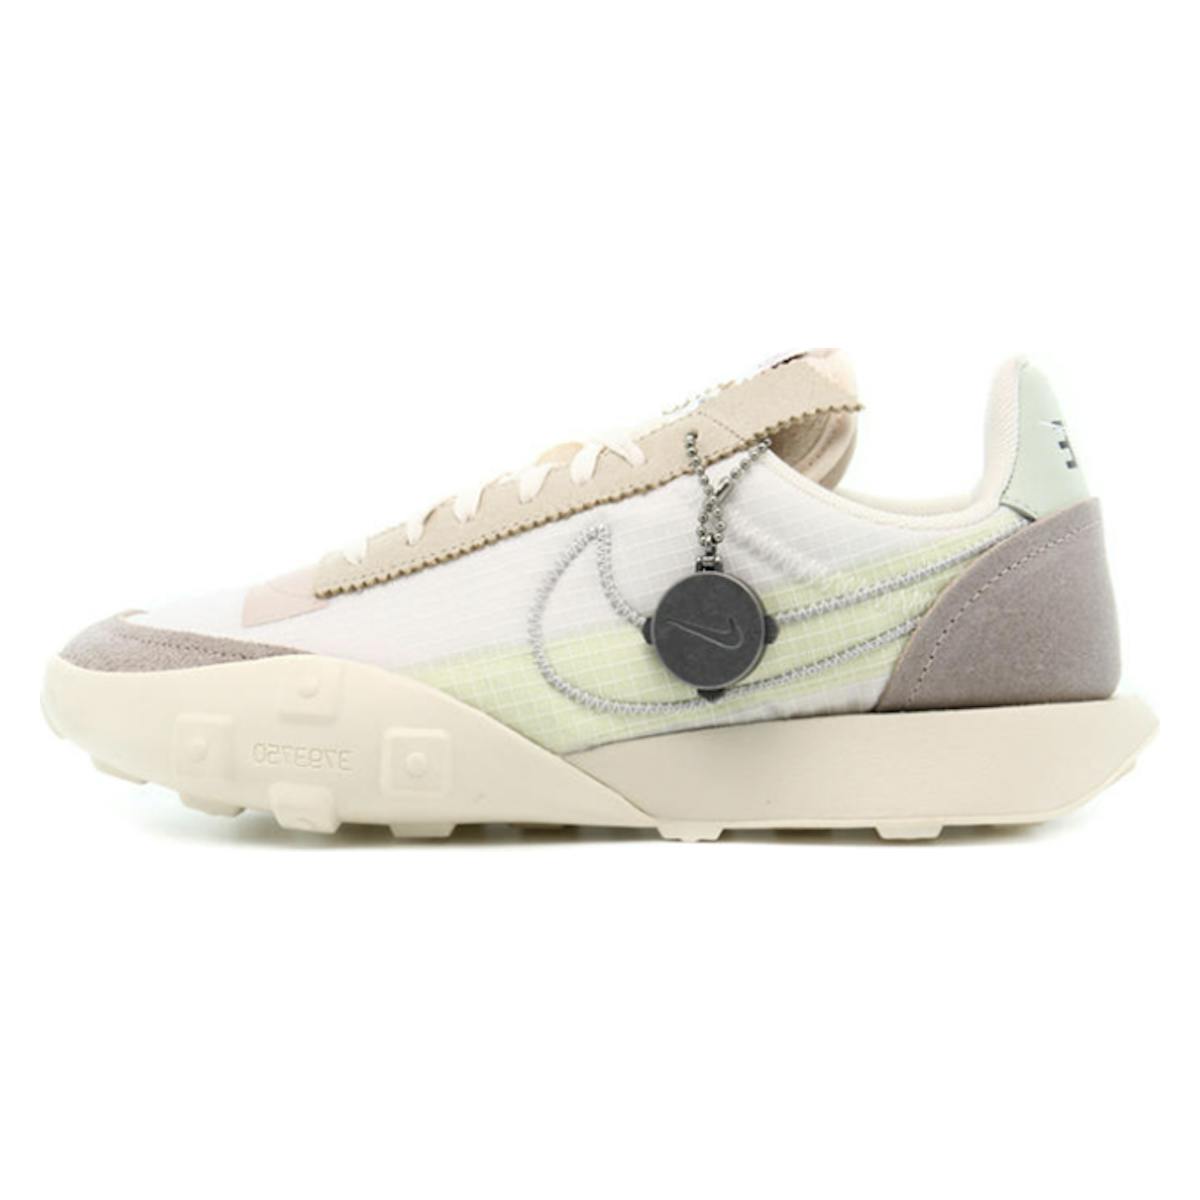 Nike WMNS Waffle Racer LX Series QS "Pale Ivory"